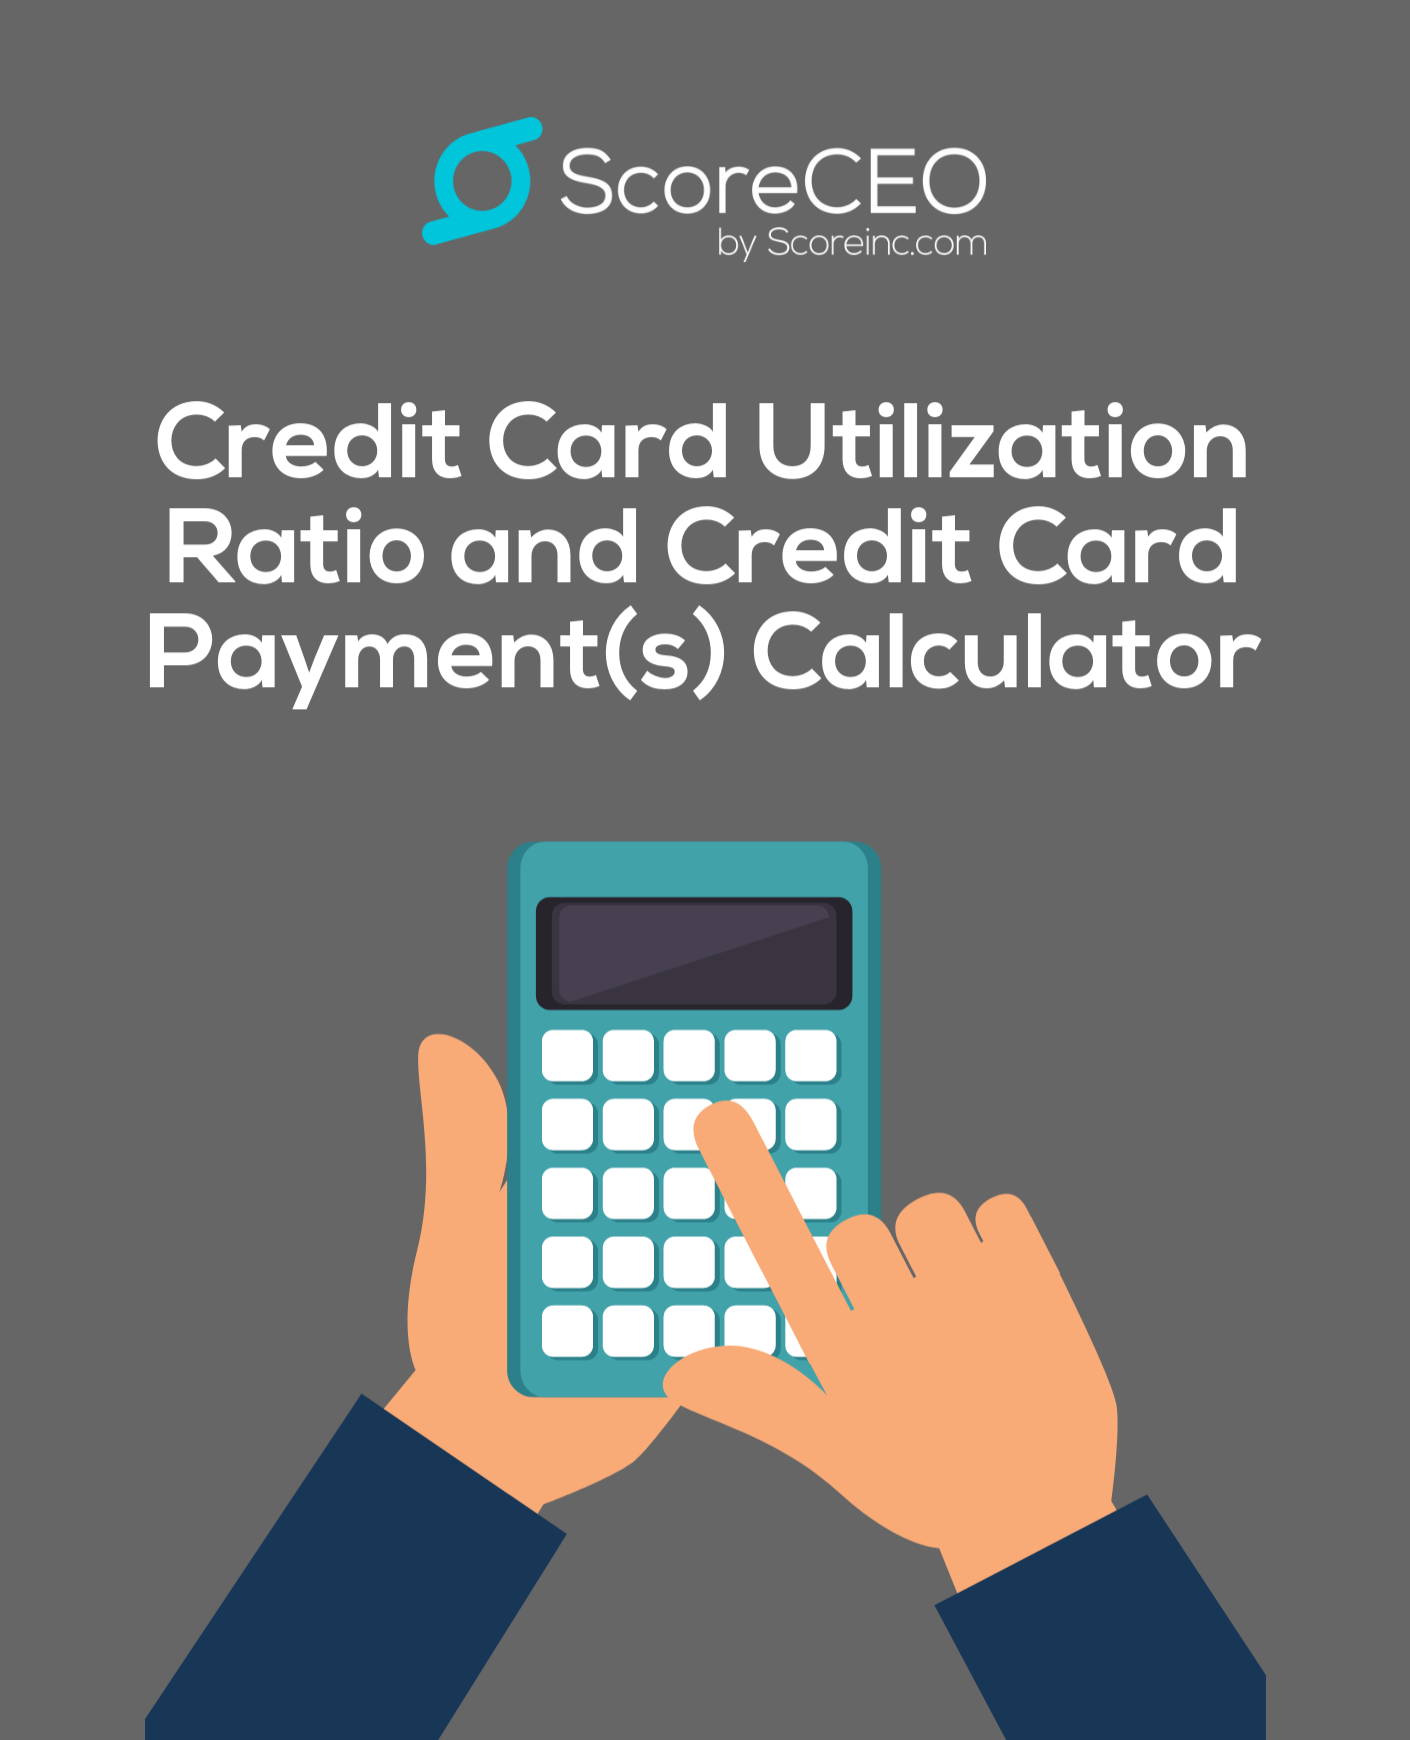 Credit Card Utilization Ratio and Credit Card Payment(s) Calculator